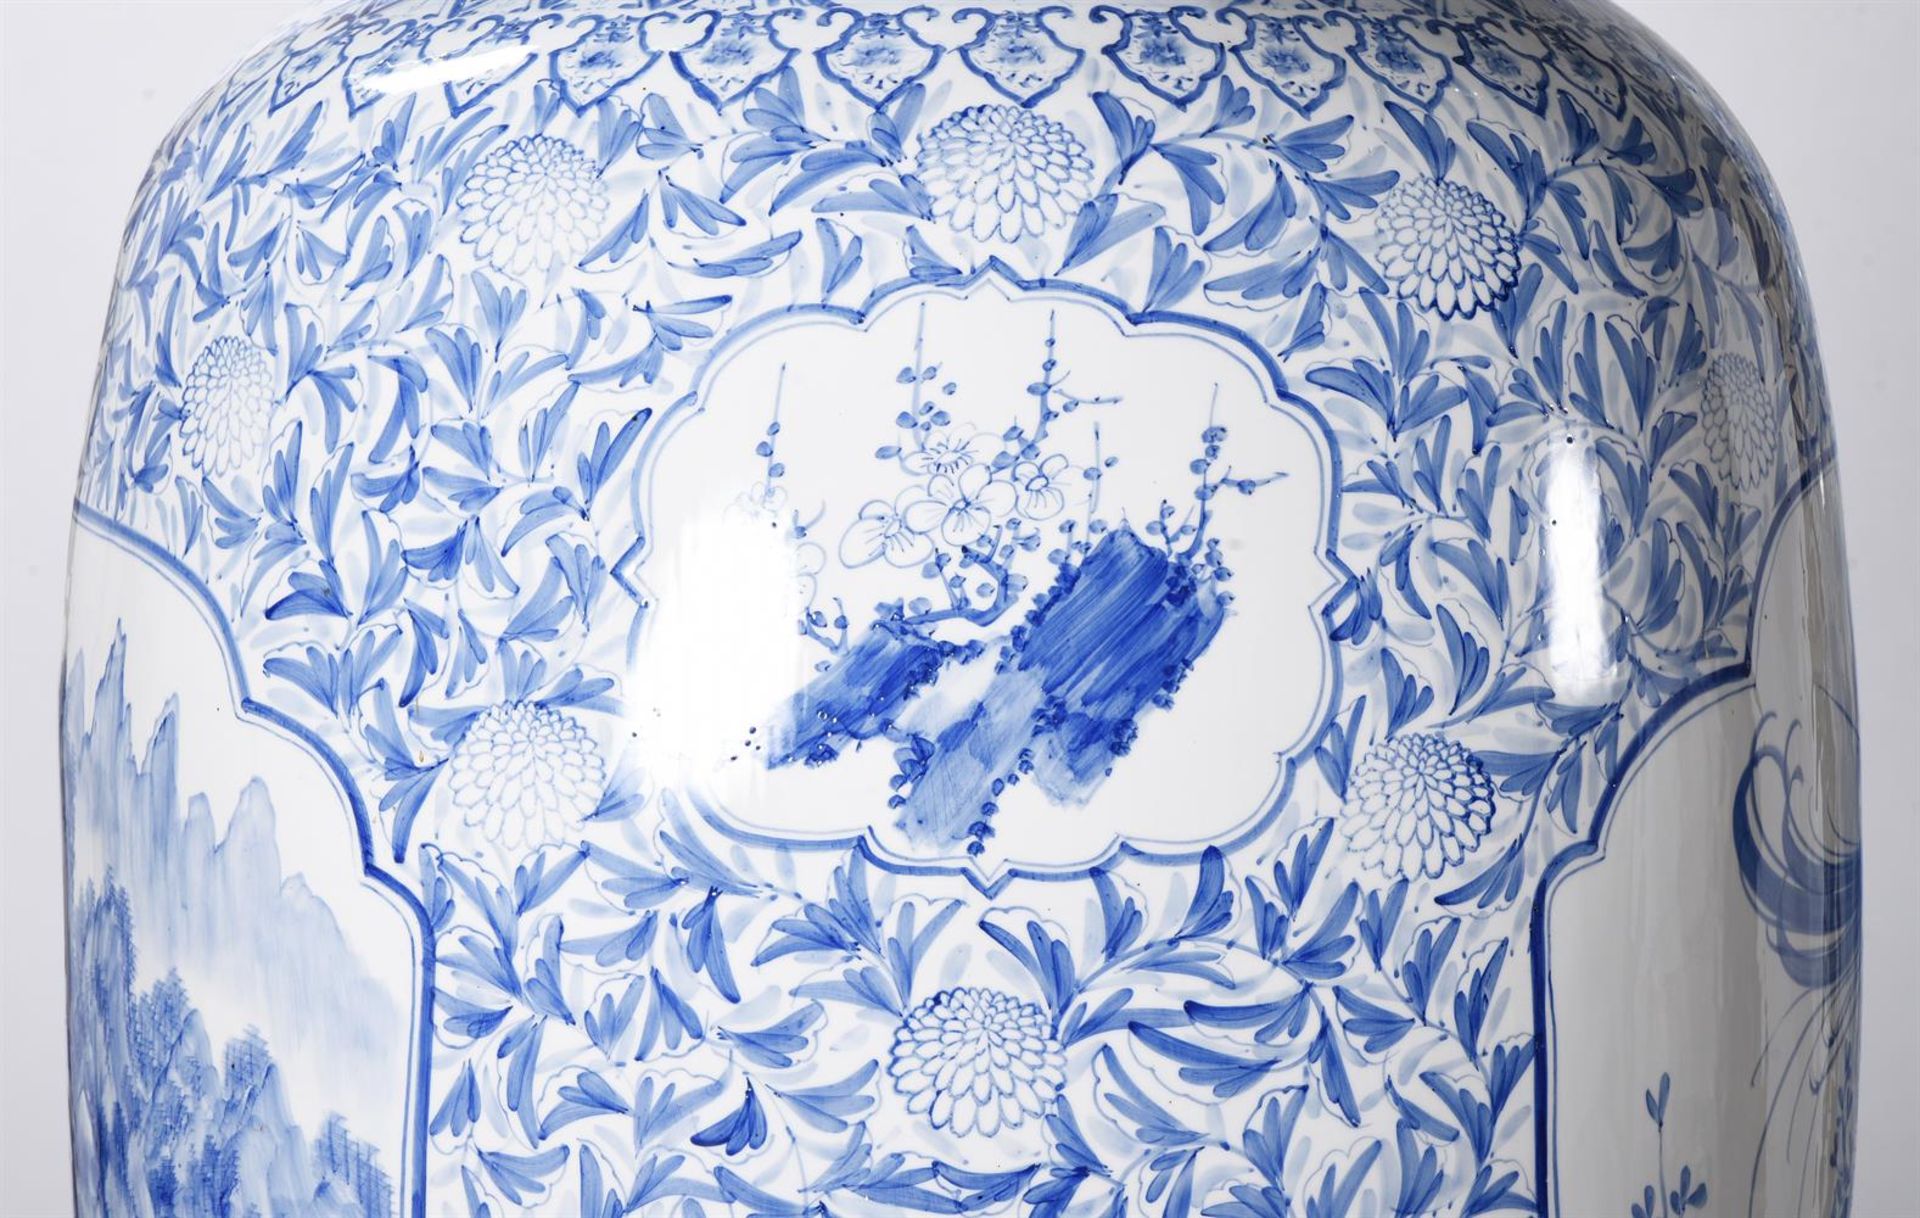 A PAIR OF MASSIVE BLUE AND WHITE PORCELAIN VASES, IN CHINESE STYLE, OF RECENT MANUFACTURE - Image 4 of 8